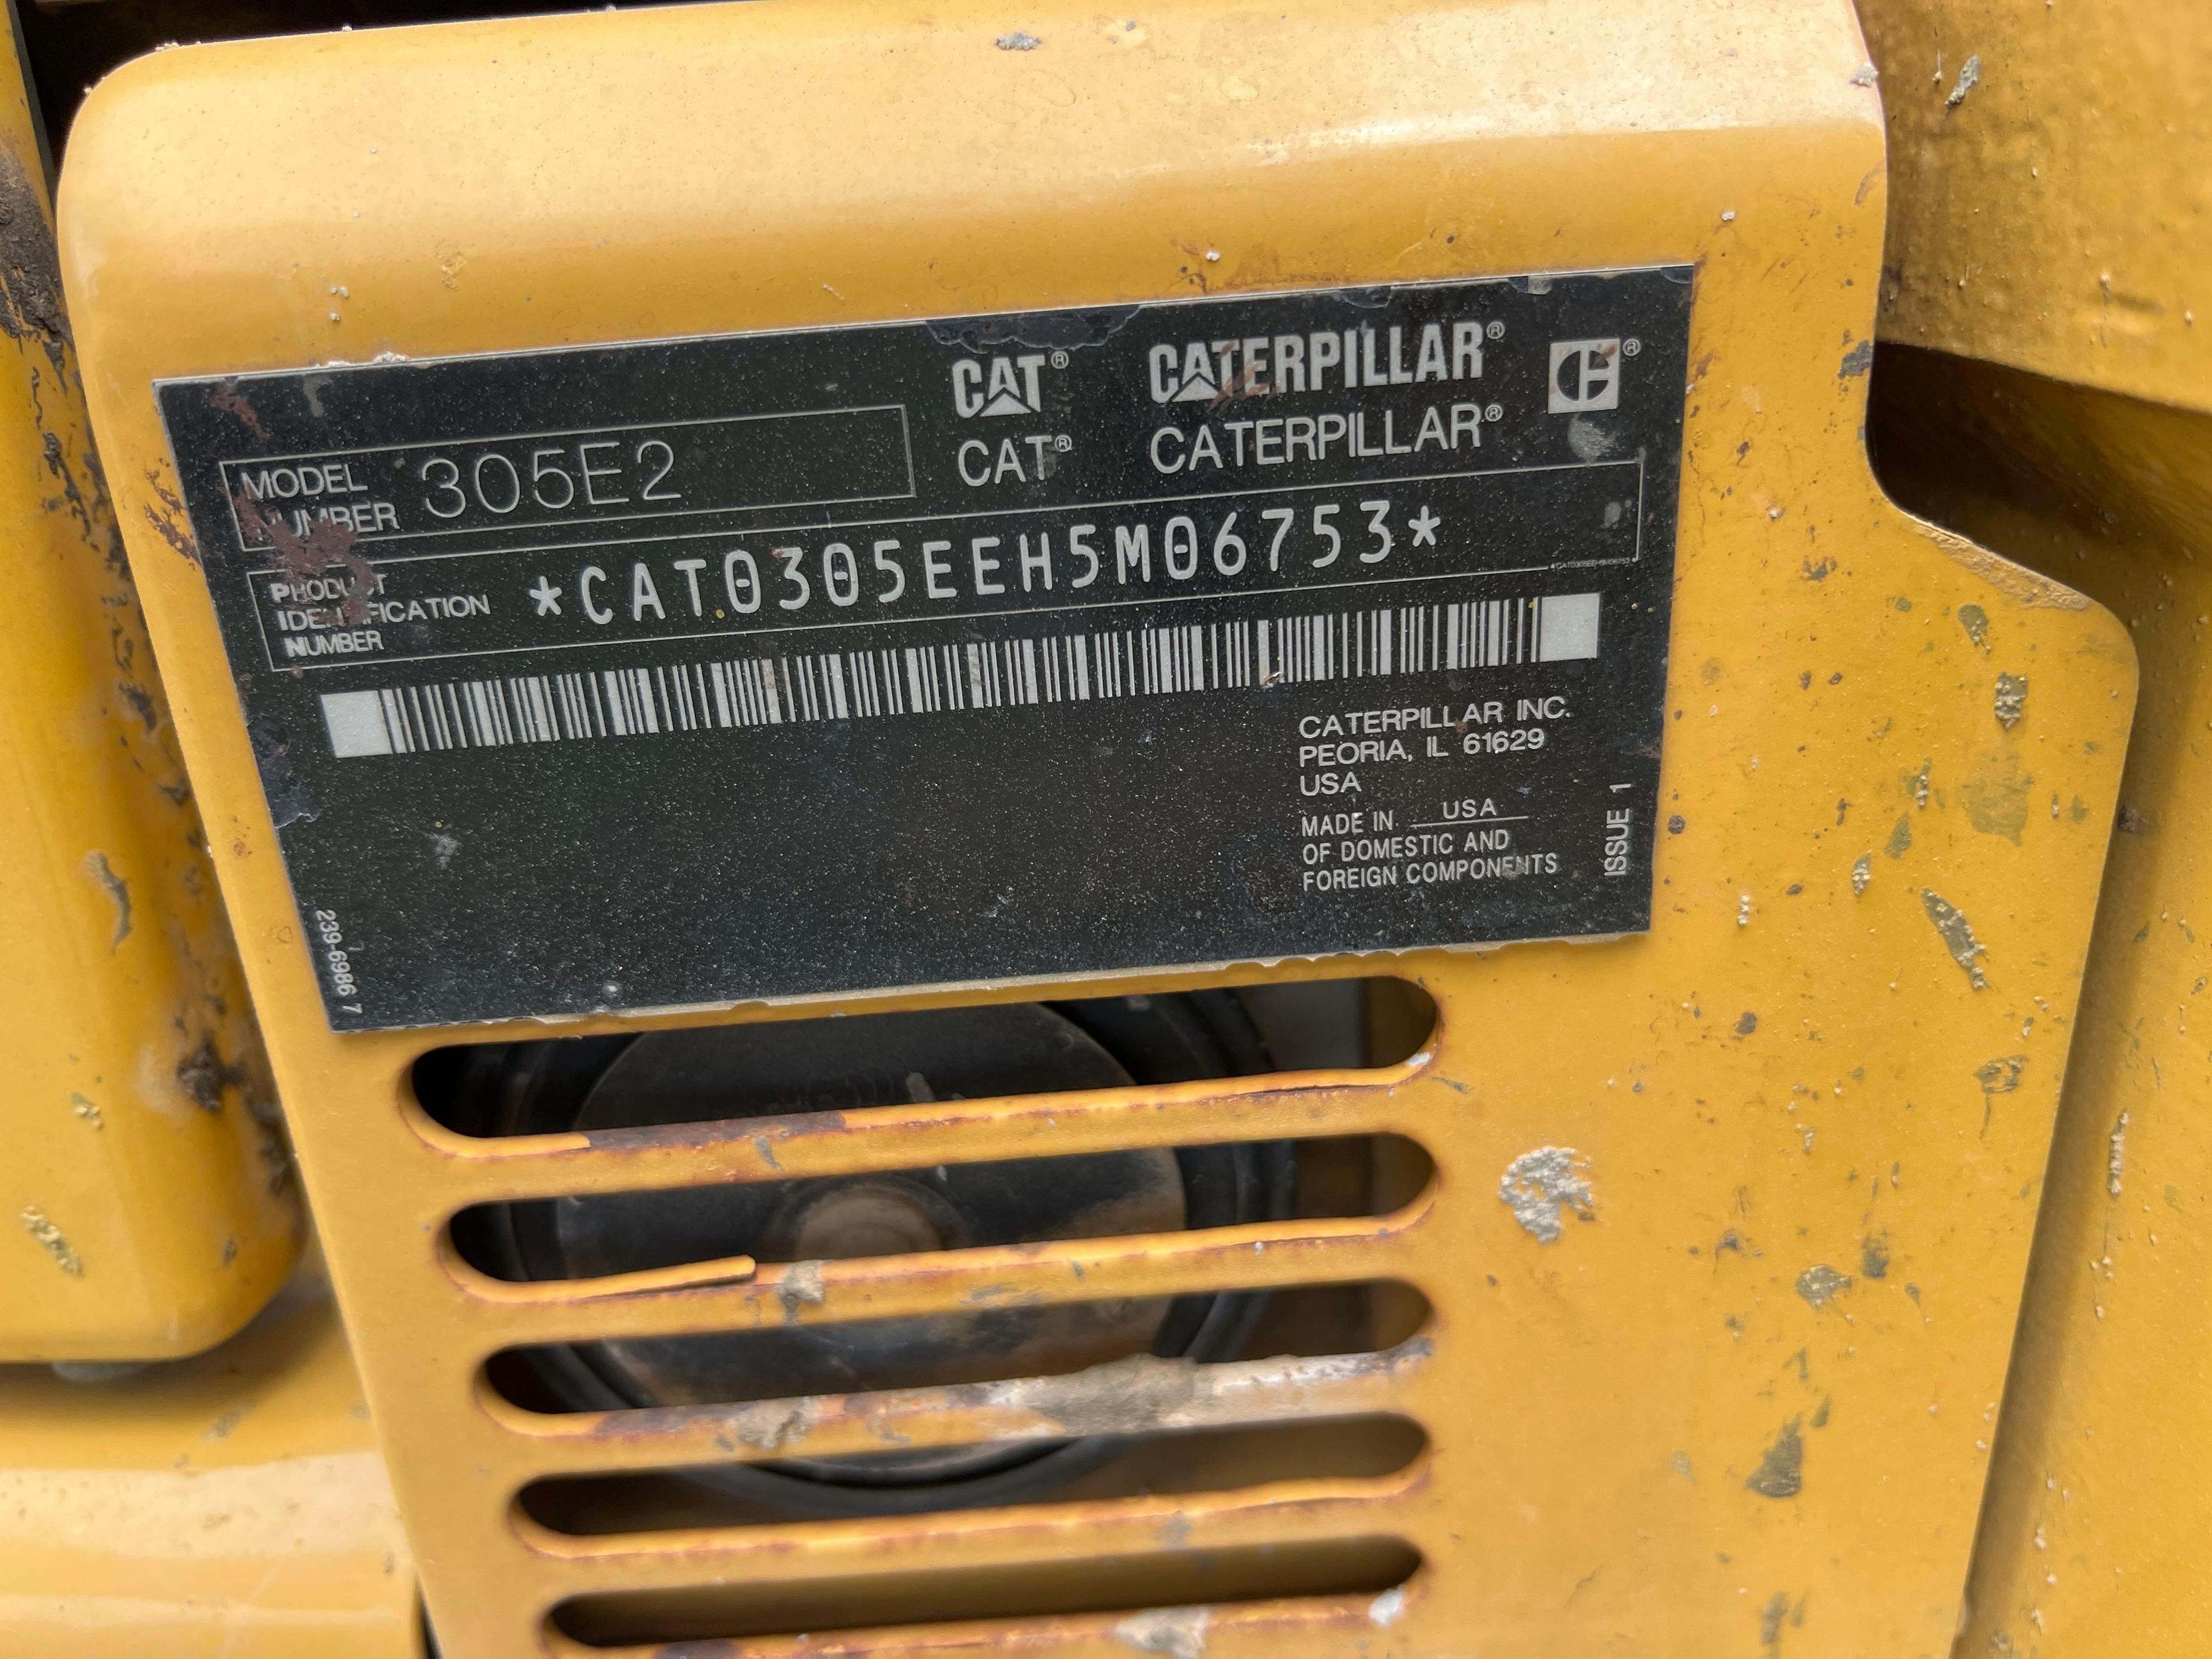 2018 CAT 305E2CR HYDRAULIC EXCAVATOR SN:H5M06753 powered by Cat diesel engine, equipped with OROPS,